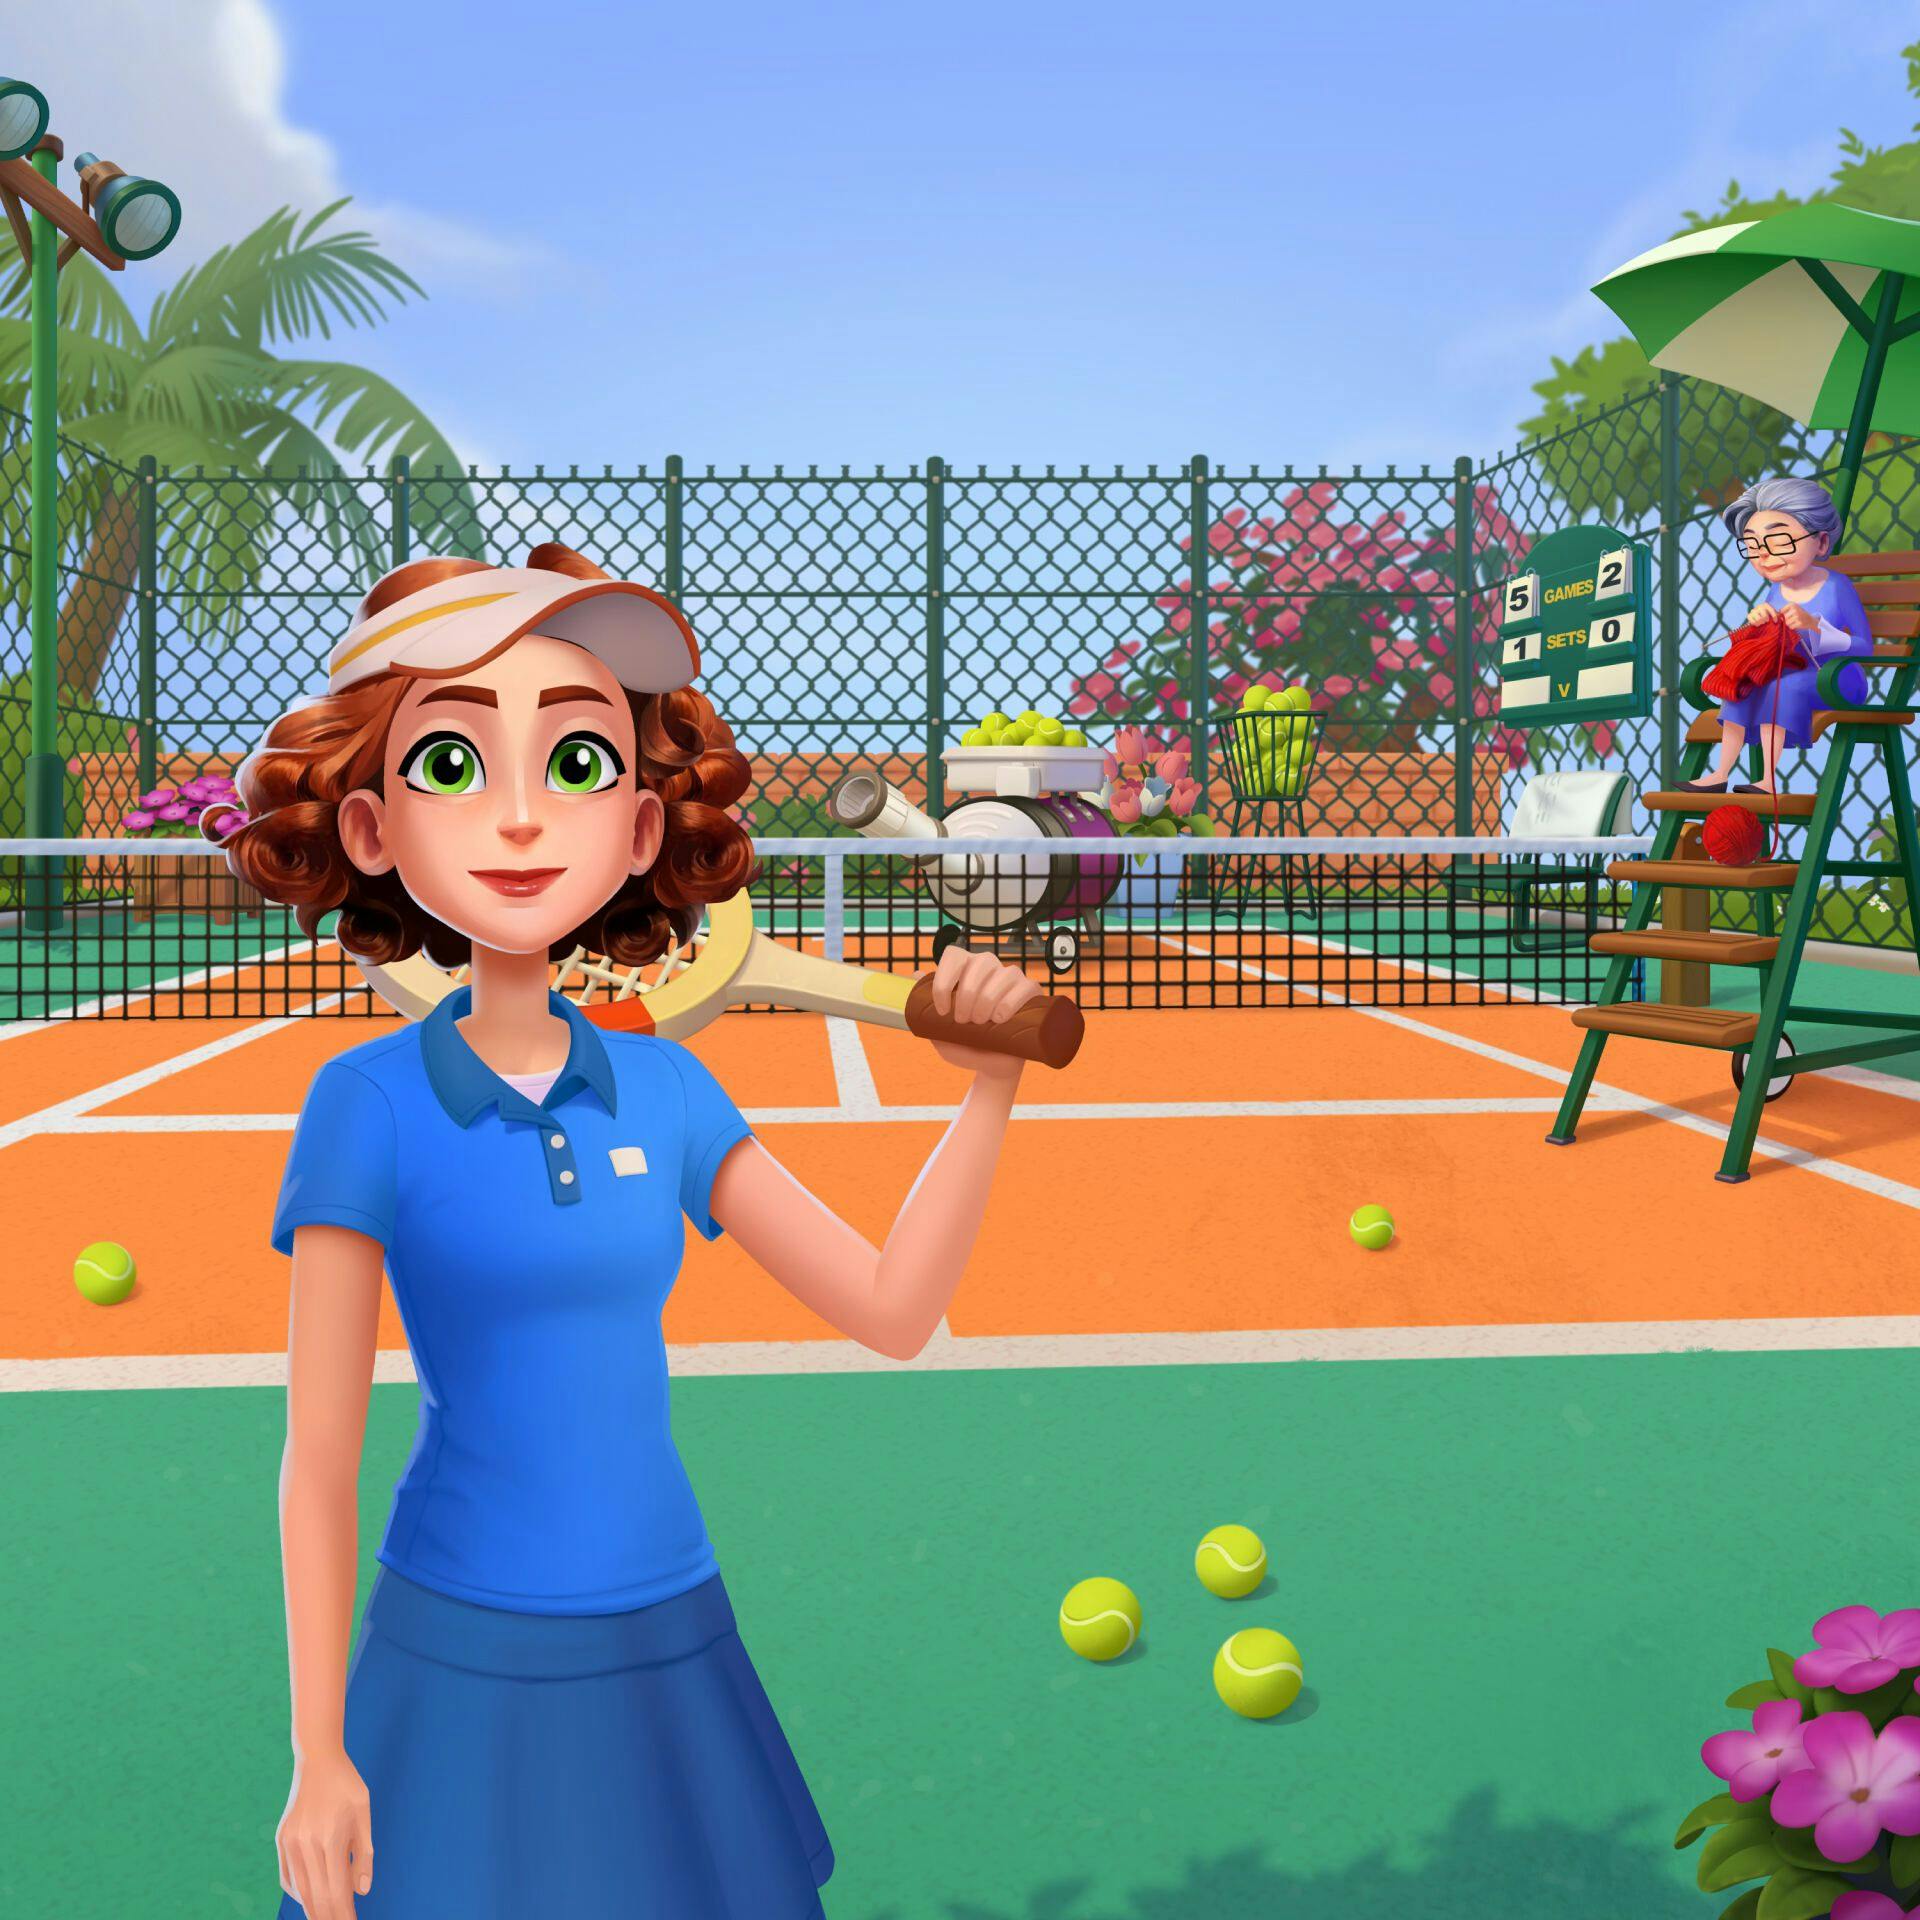 A redhead in tennis gear posing in front of a tennis court